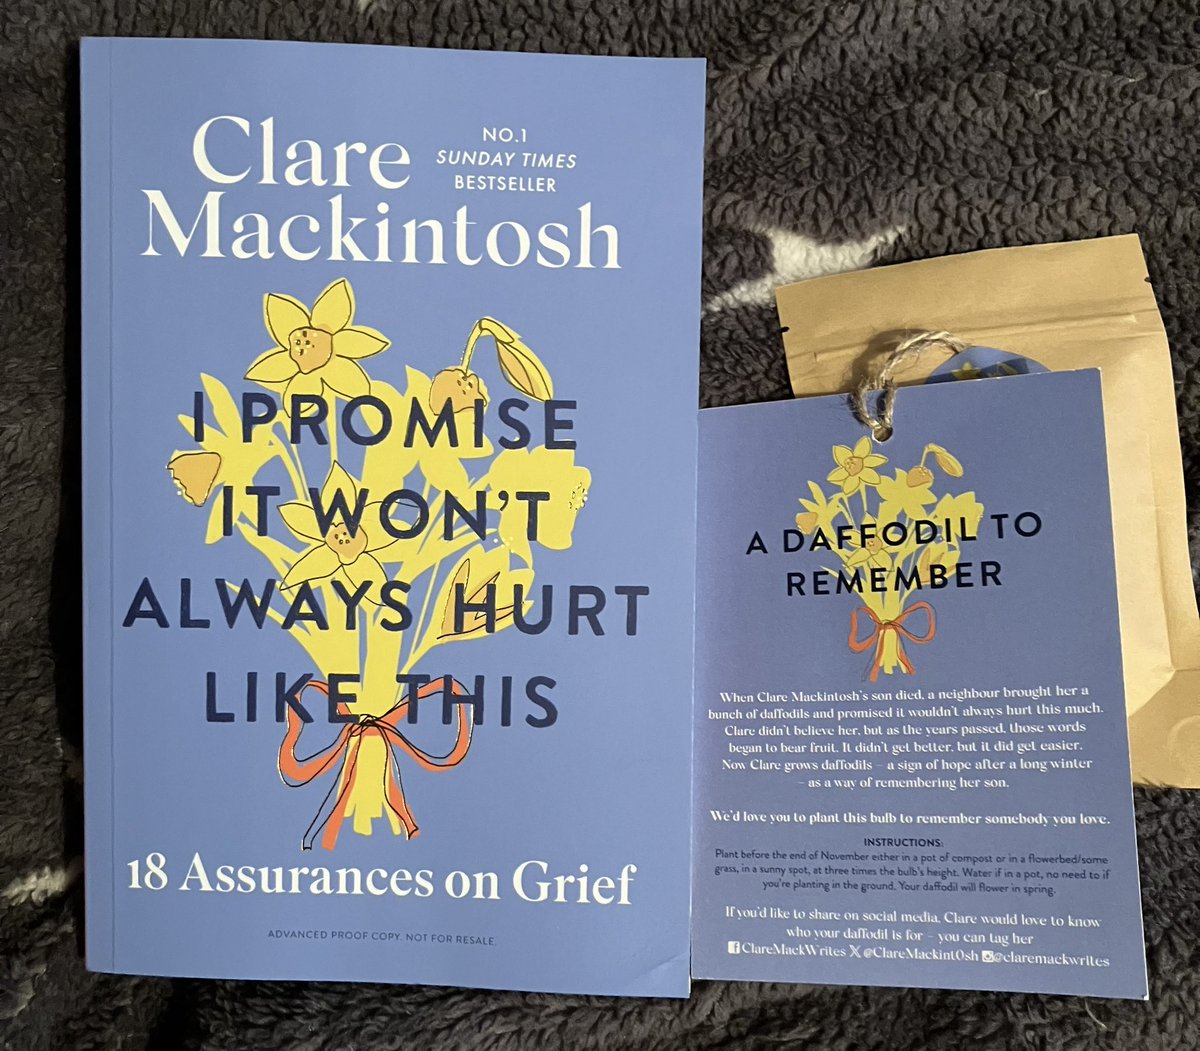 Thank you to @BooksSphere for my copy of @claremackint0sh #IPromiseItWontAlwaysHurtLikeThis I encounter a lot of grief through work on Intensive Care and I think this book will be very insightful and provide a lot of food for thought.